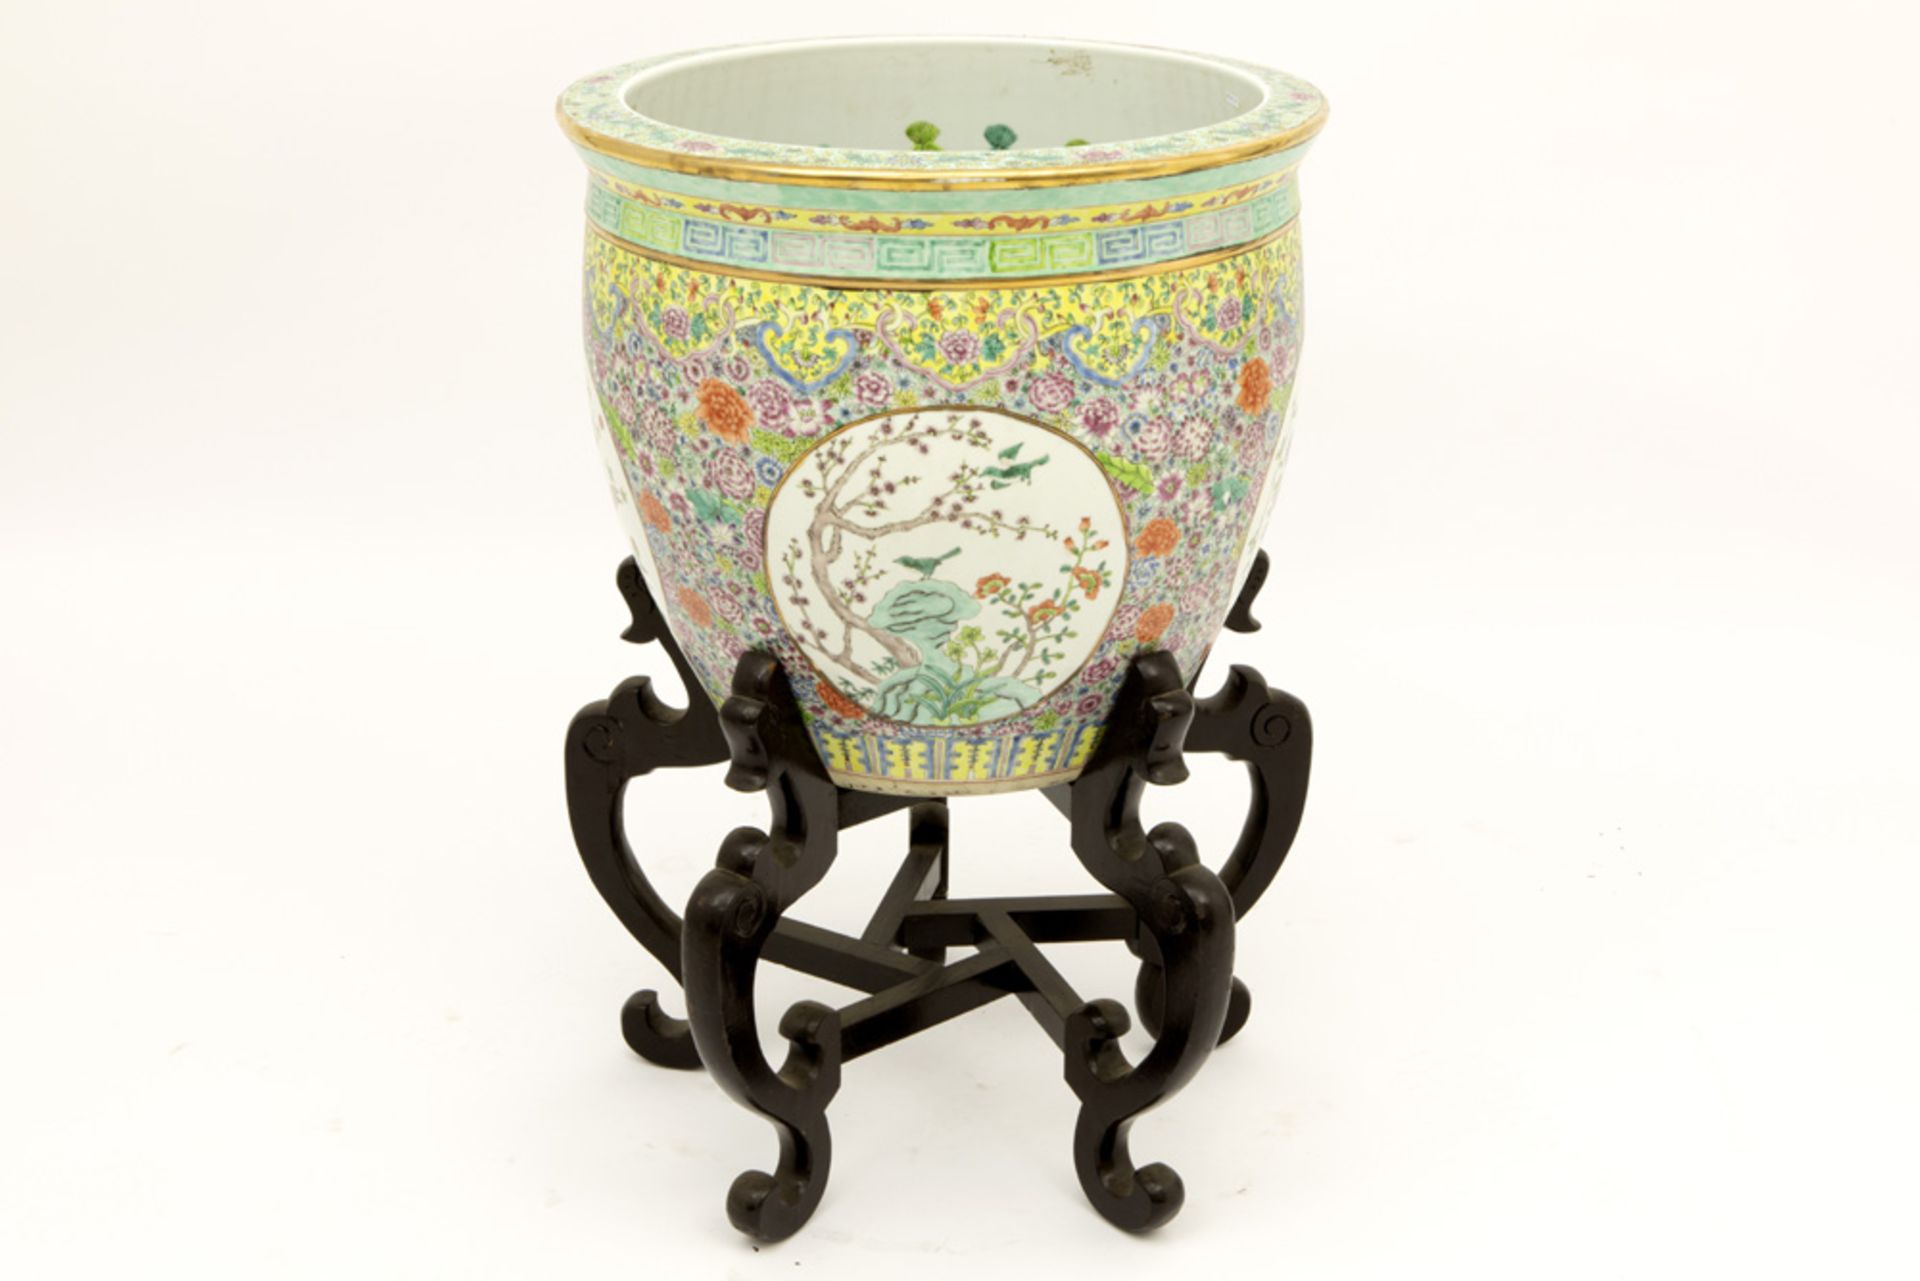 20th Cent. Chinese porcelain fishbowl with polychrome decor and with its stand || Chinese "fishbowl"